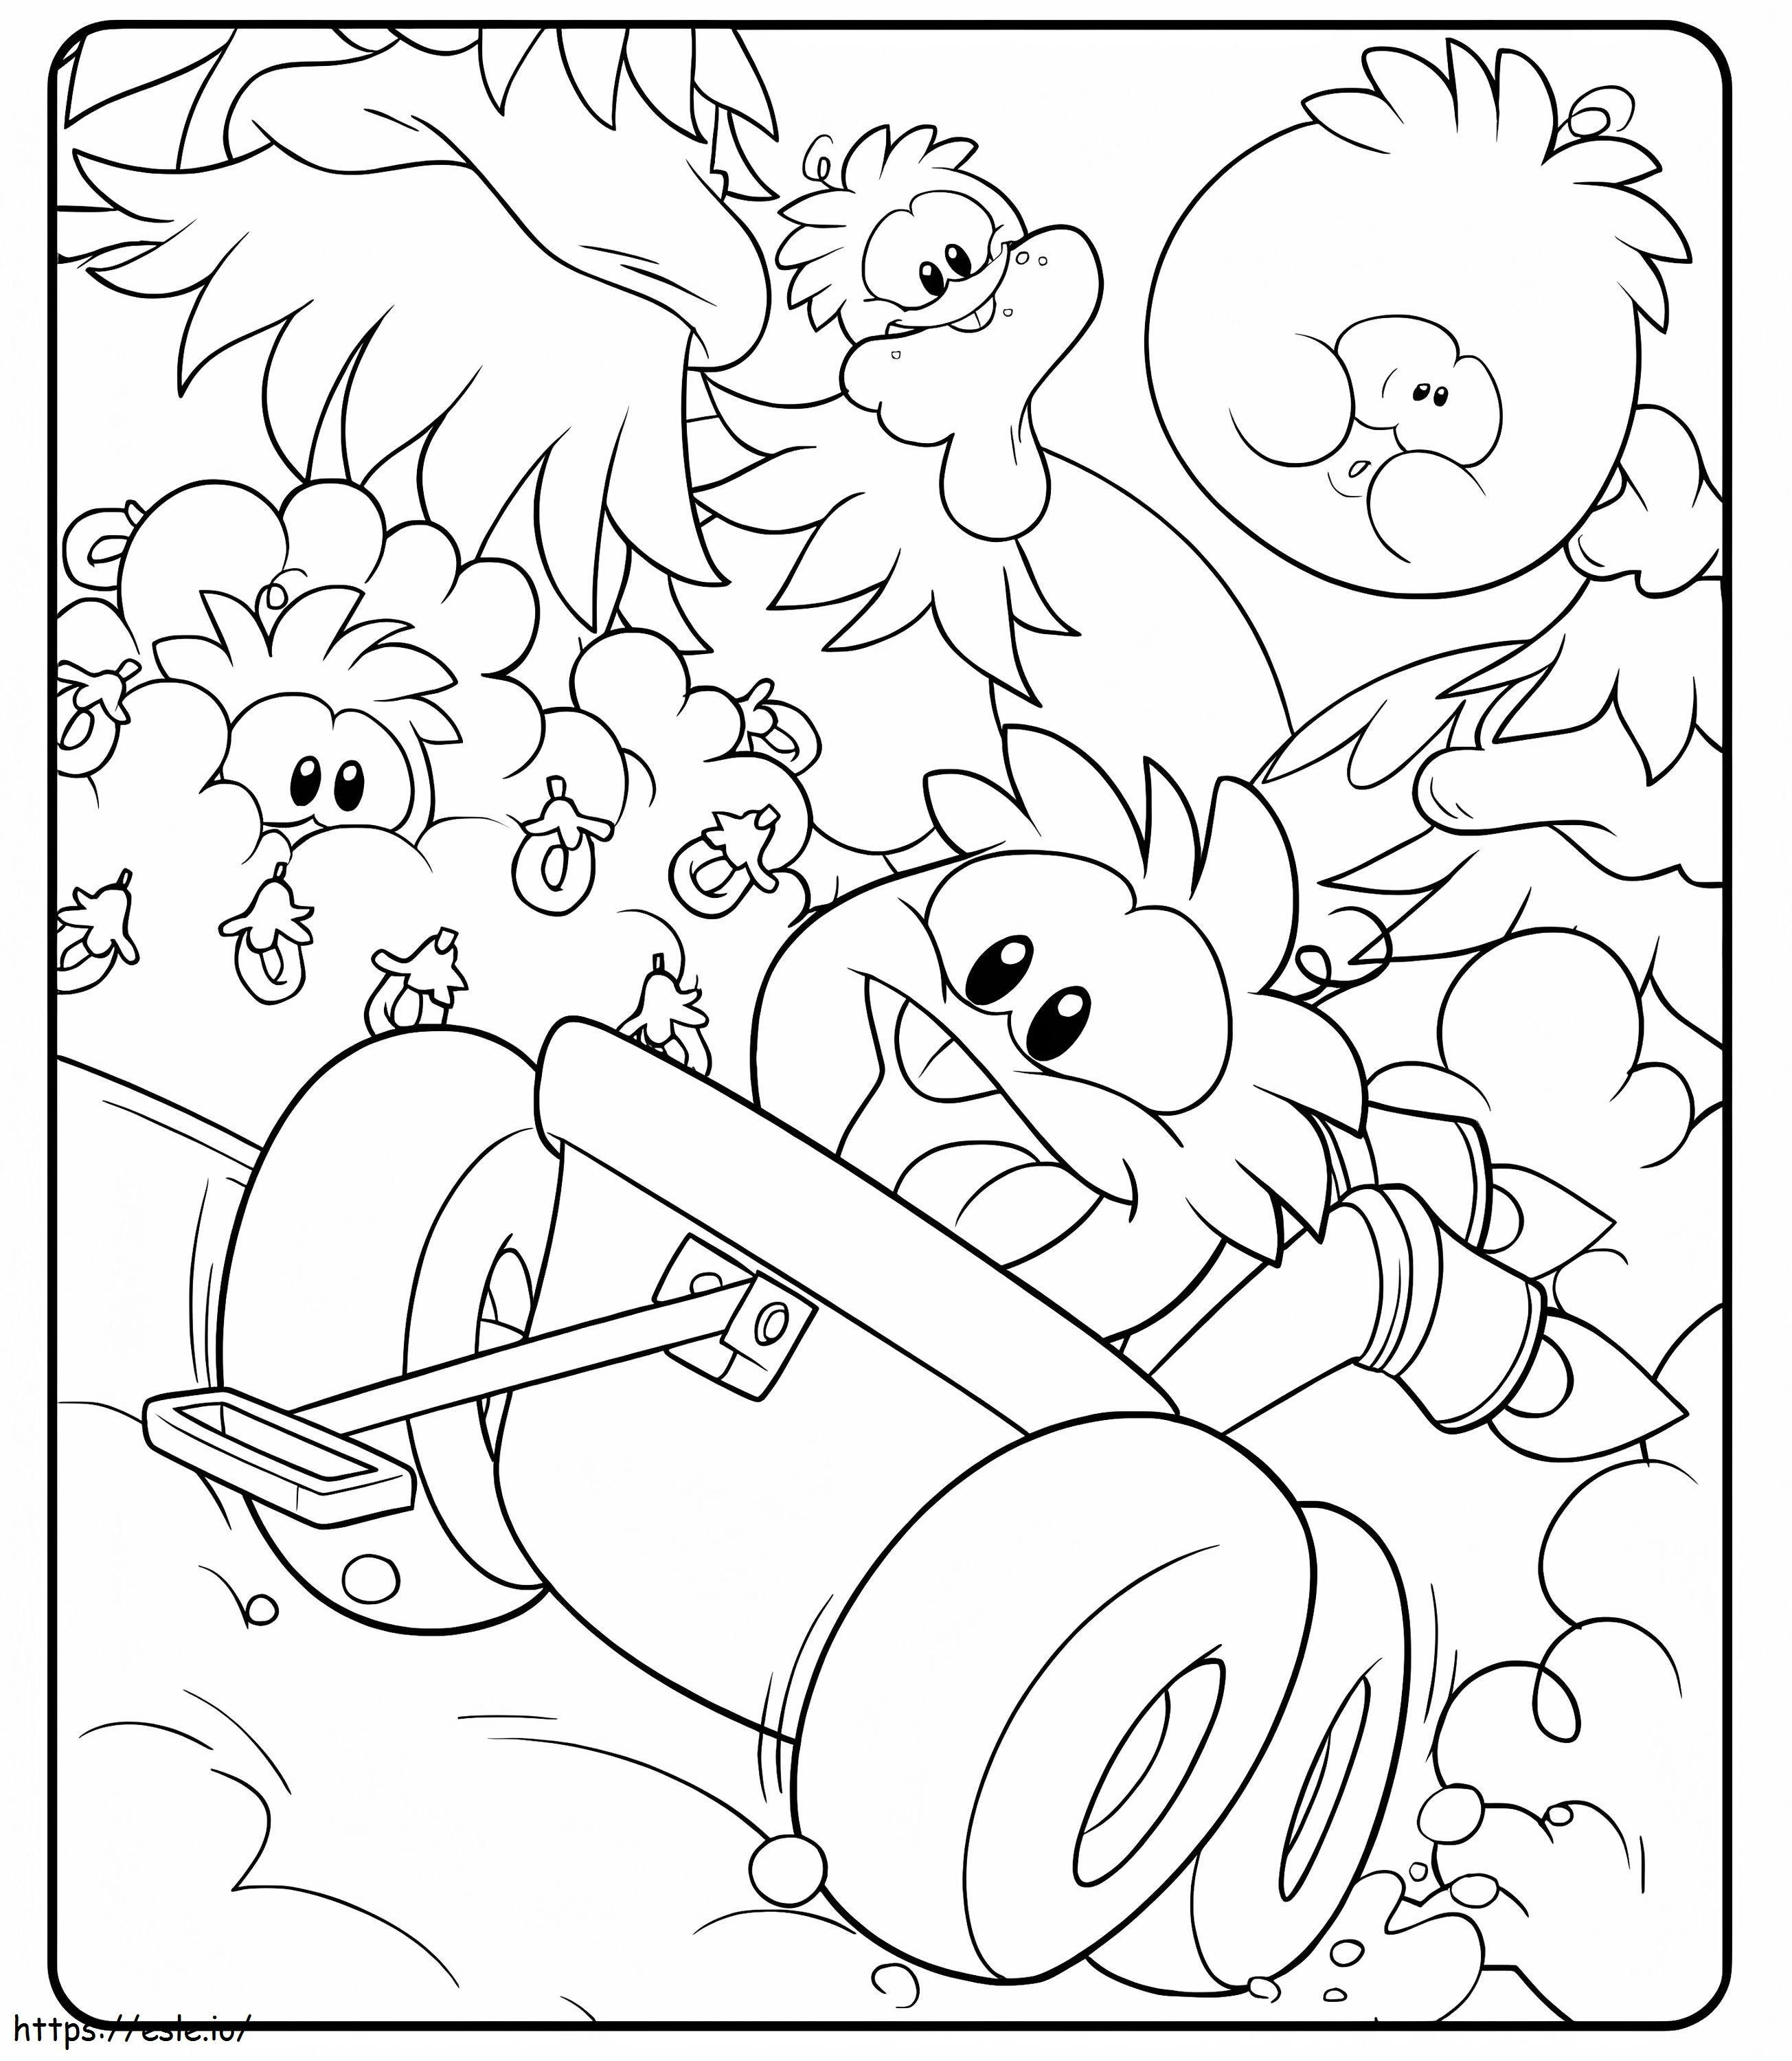 Funny Club Penguin coloring page